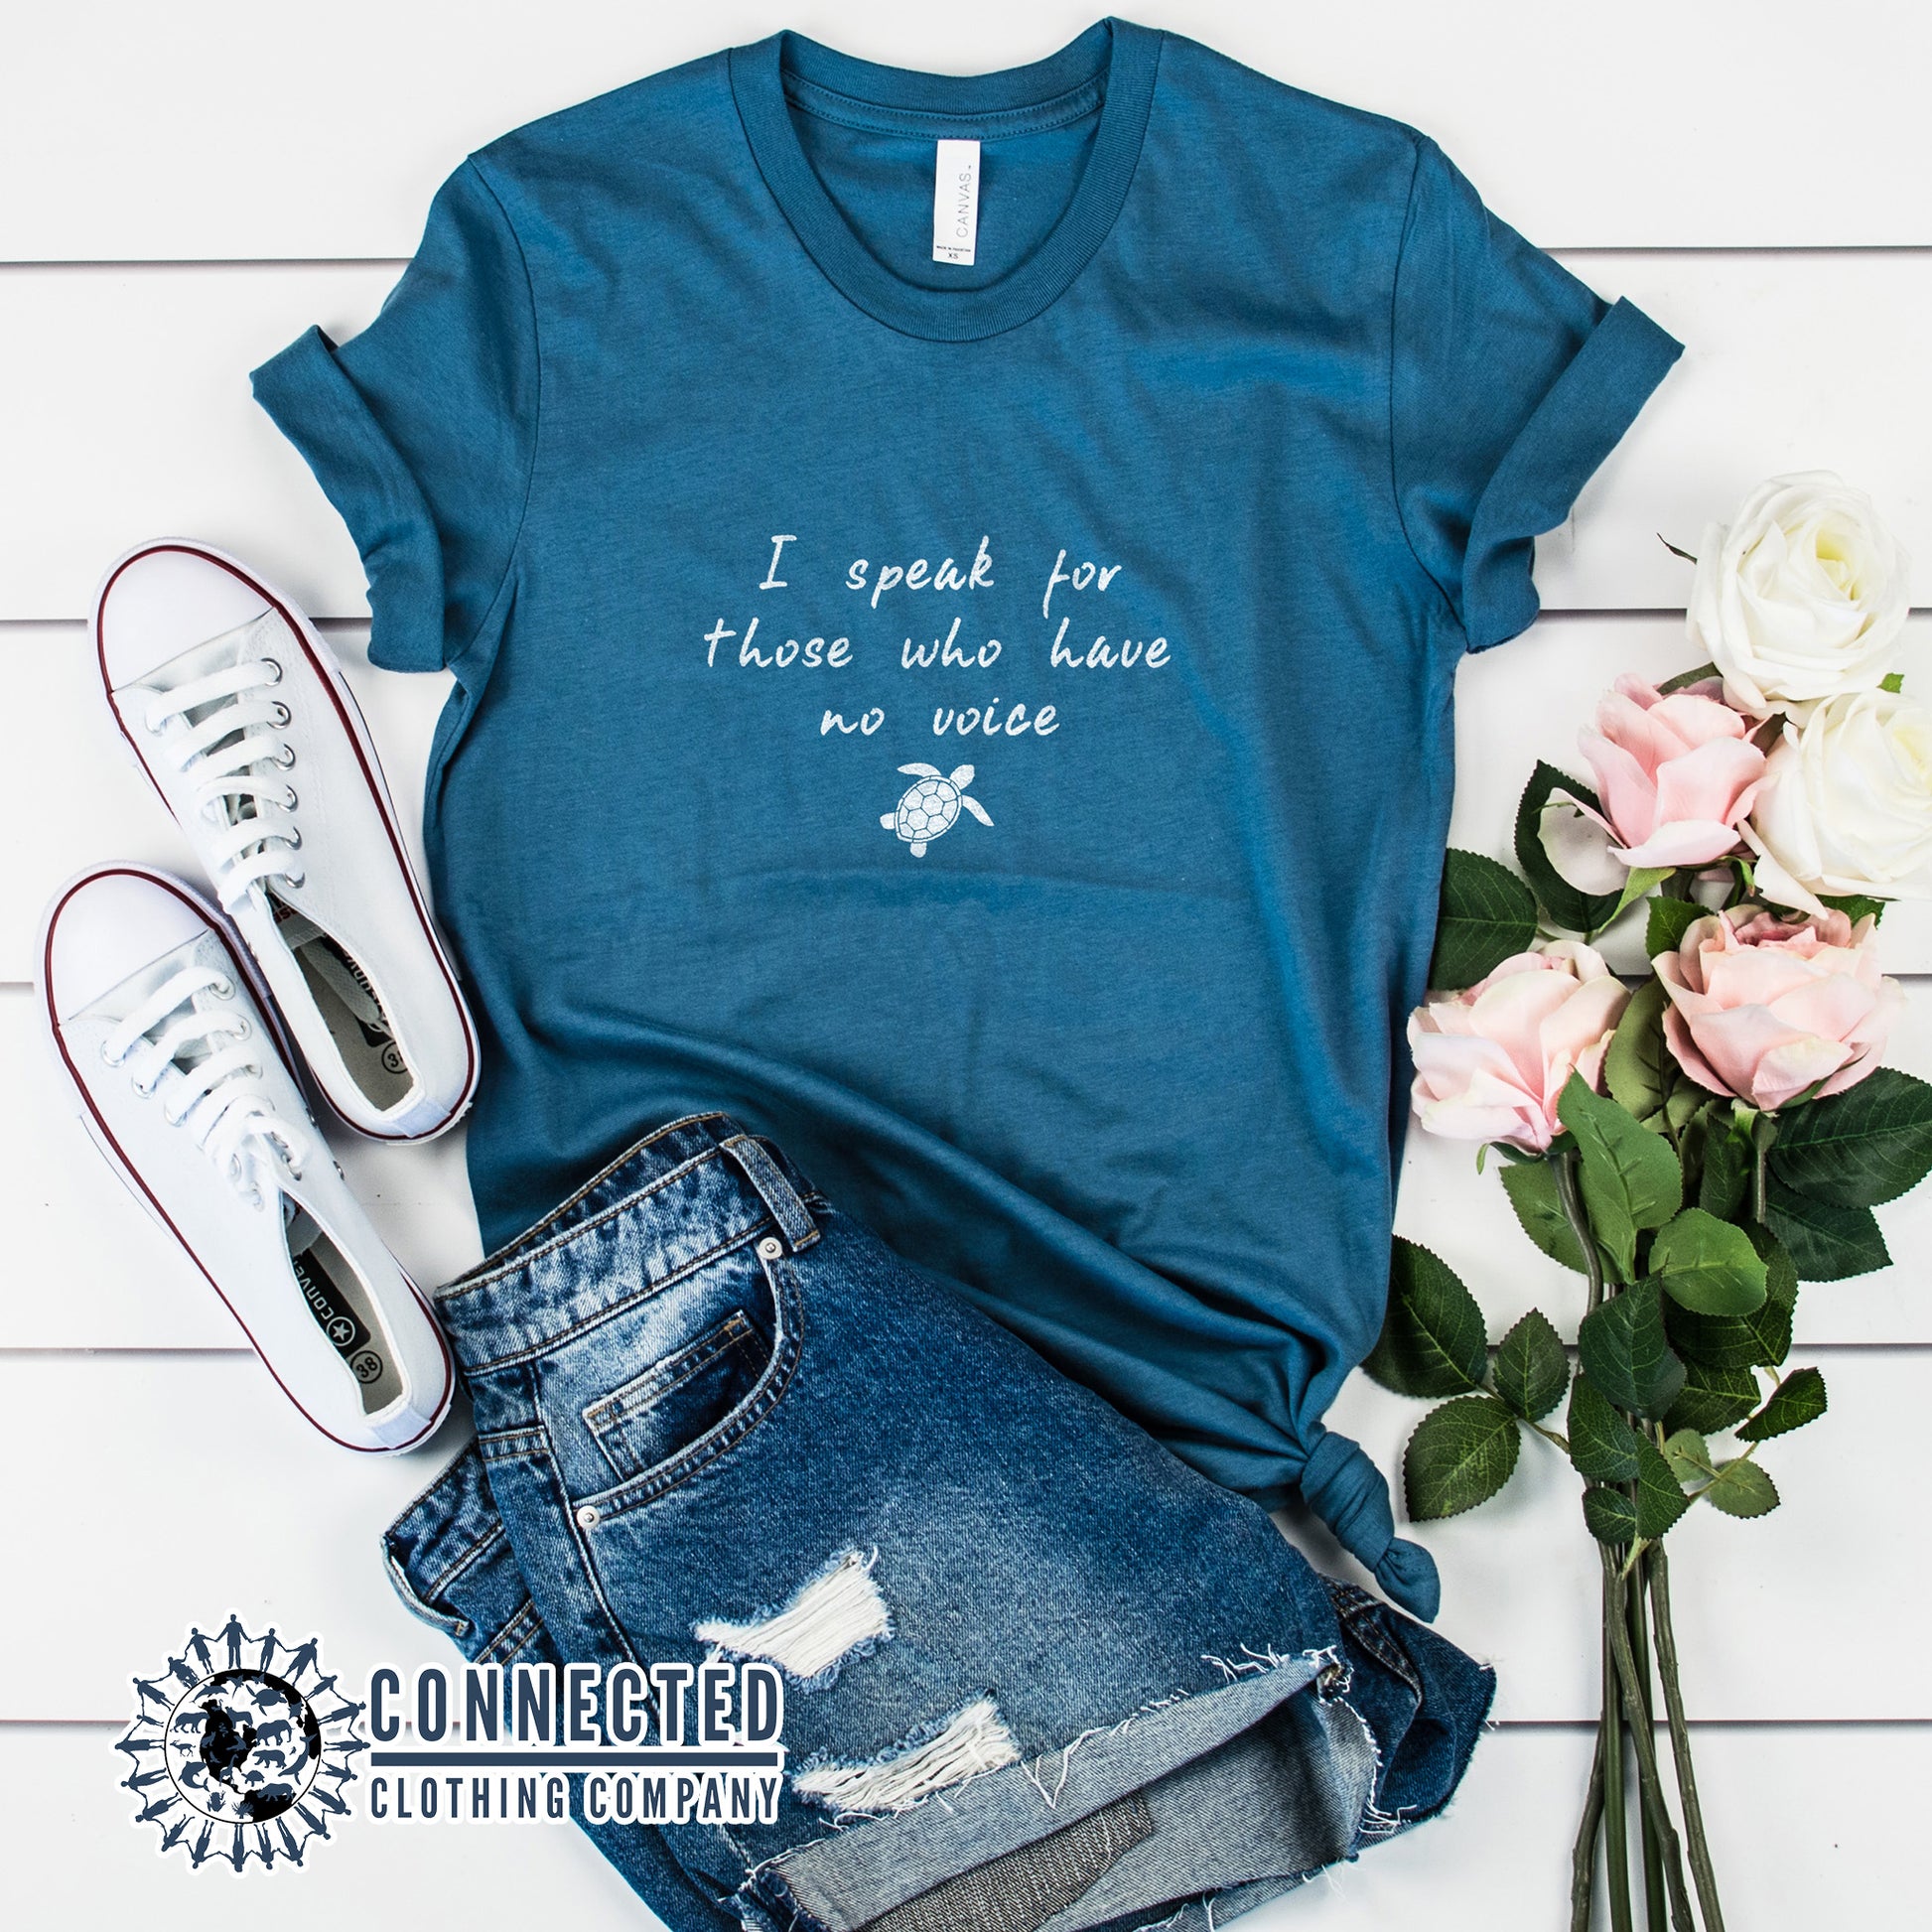 Steel Blue Be The Voice Sea Turtle Tee reads "I speak for those who have no voice." - sweetsherriloudesigns - Ethically and Sustainably Made - 10% donated to the Sea Turtle Conservancy